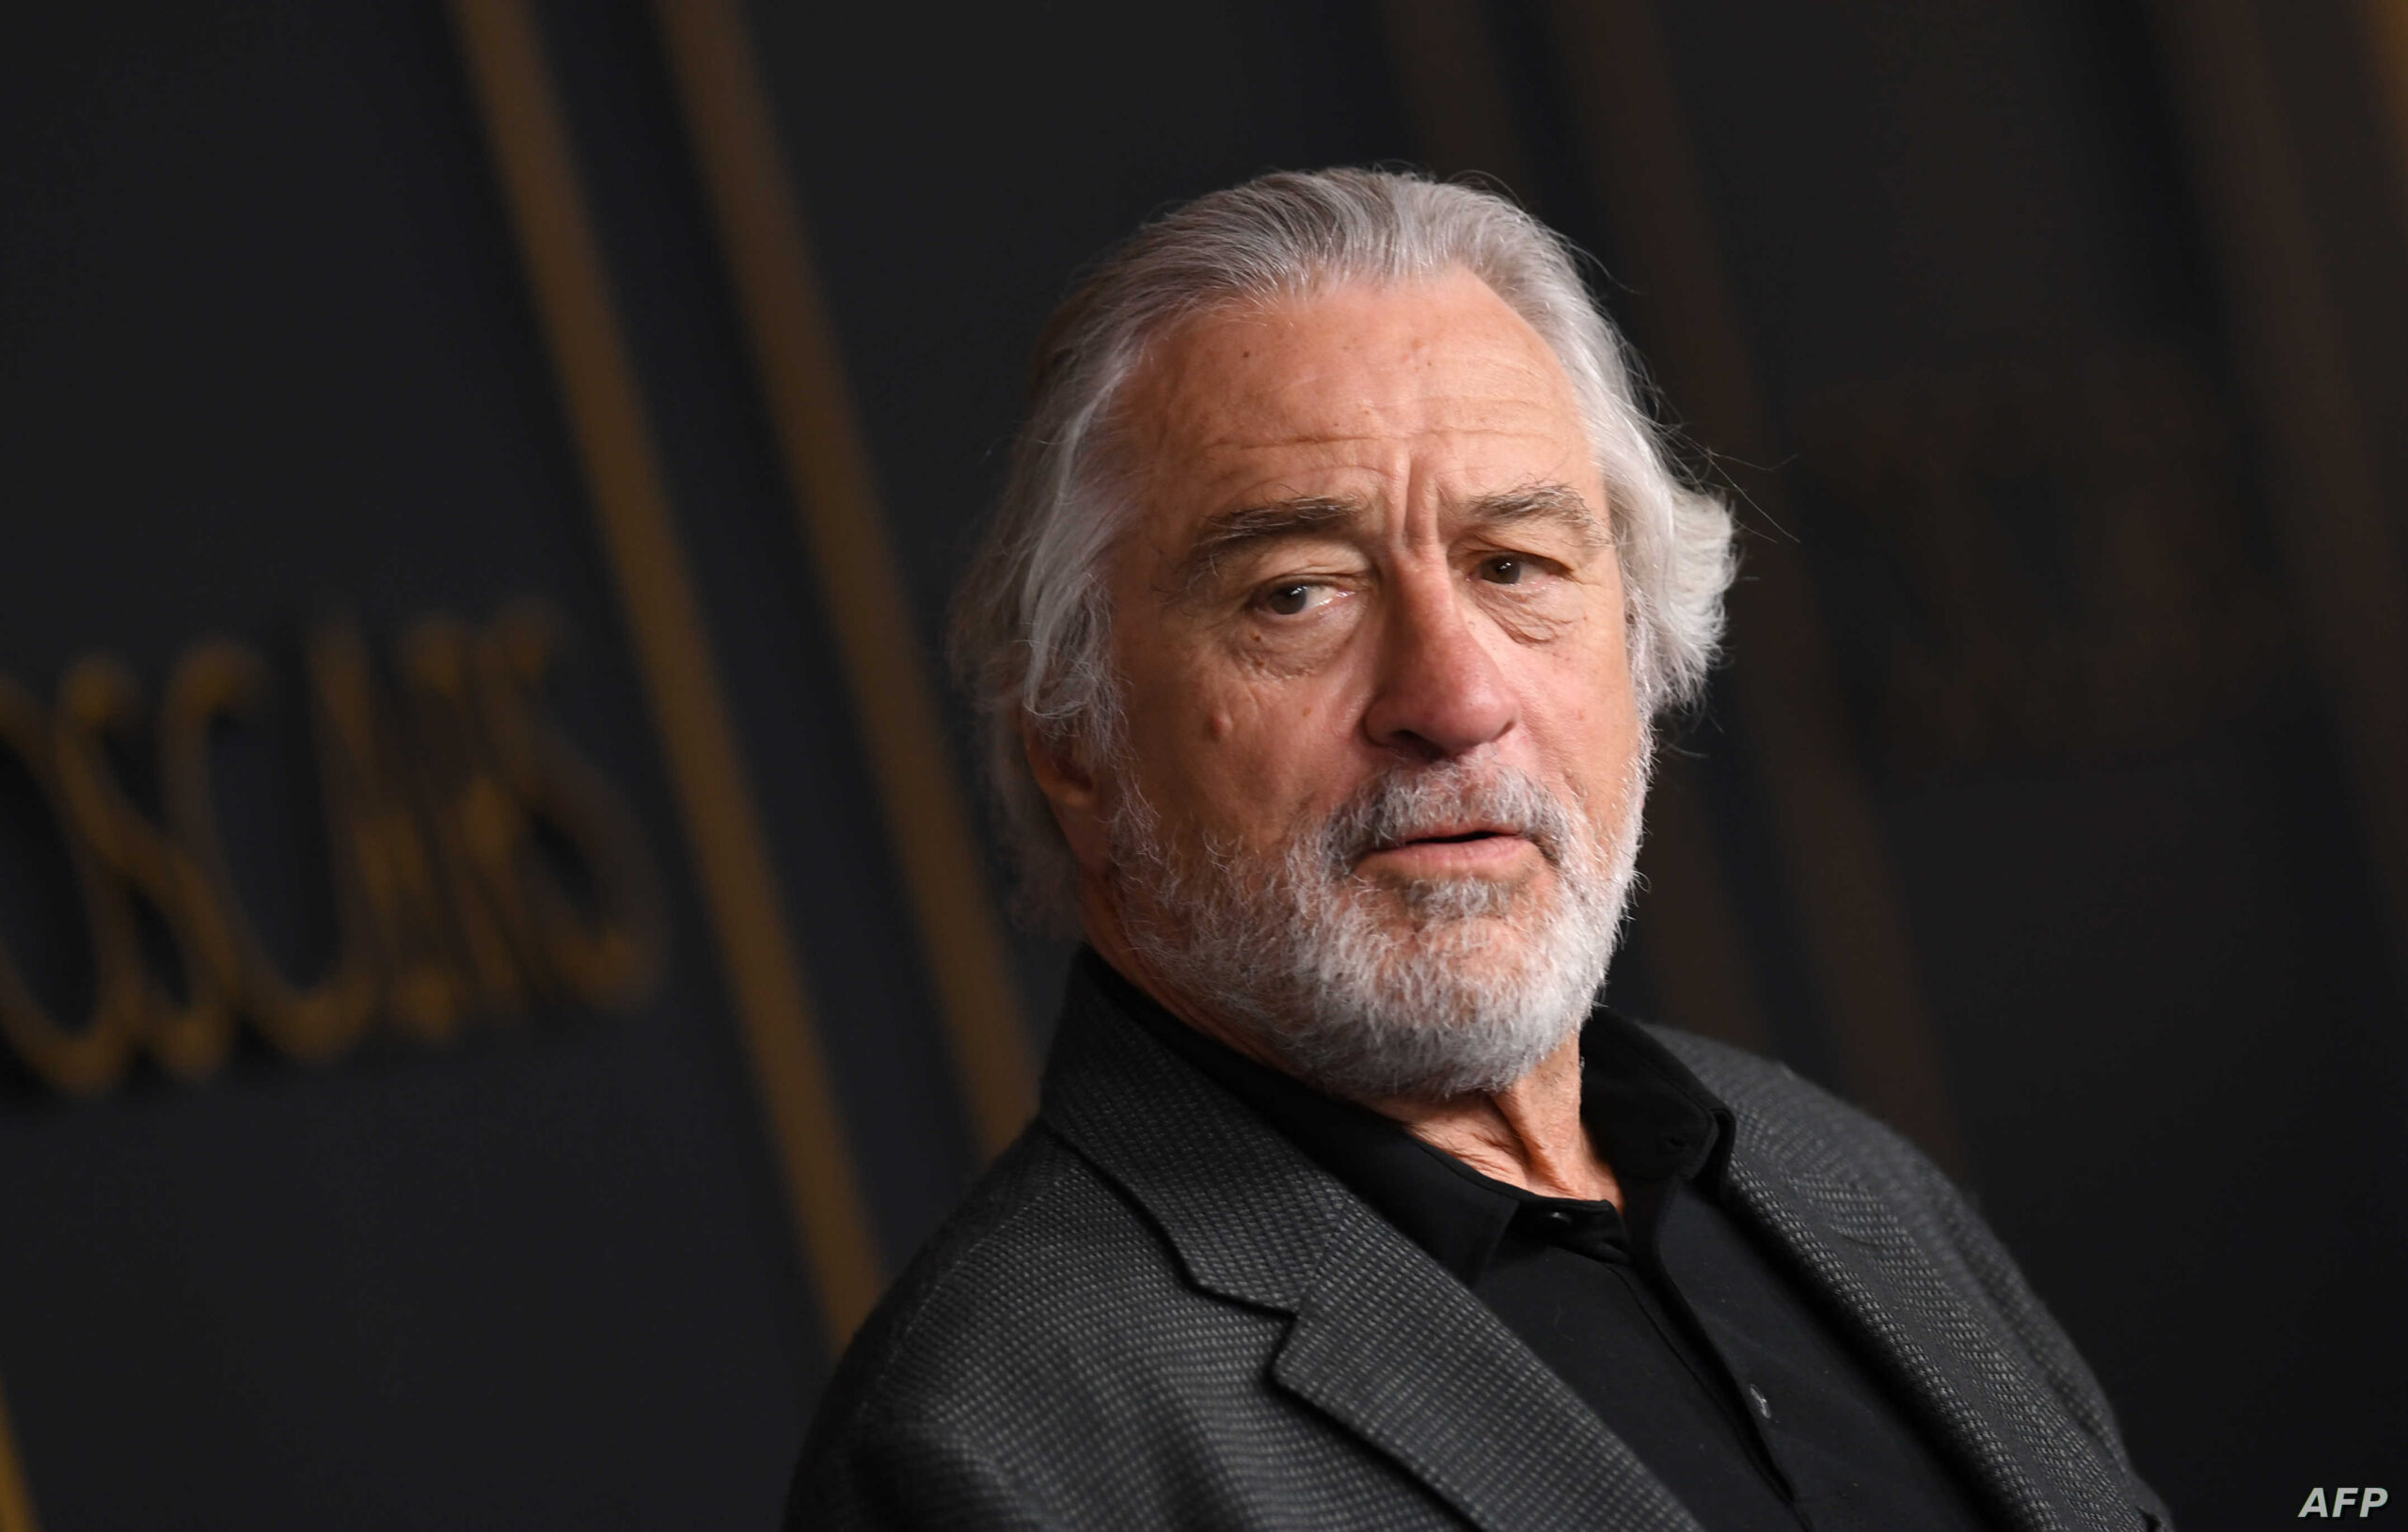 US actor Robert De Niro arrives for the 2020 Oscars Nominees Luncheon at the Dolby theatre in Hollywood on January 27, 2020. (Photo by Valerie MACON / AFP)